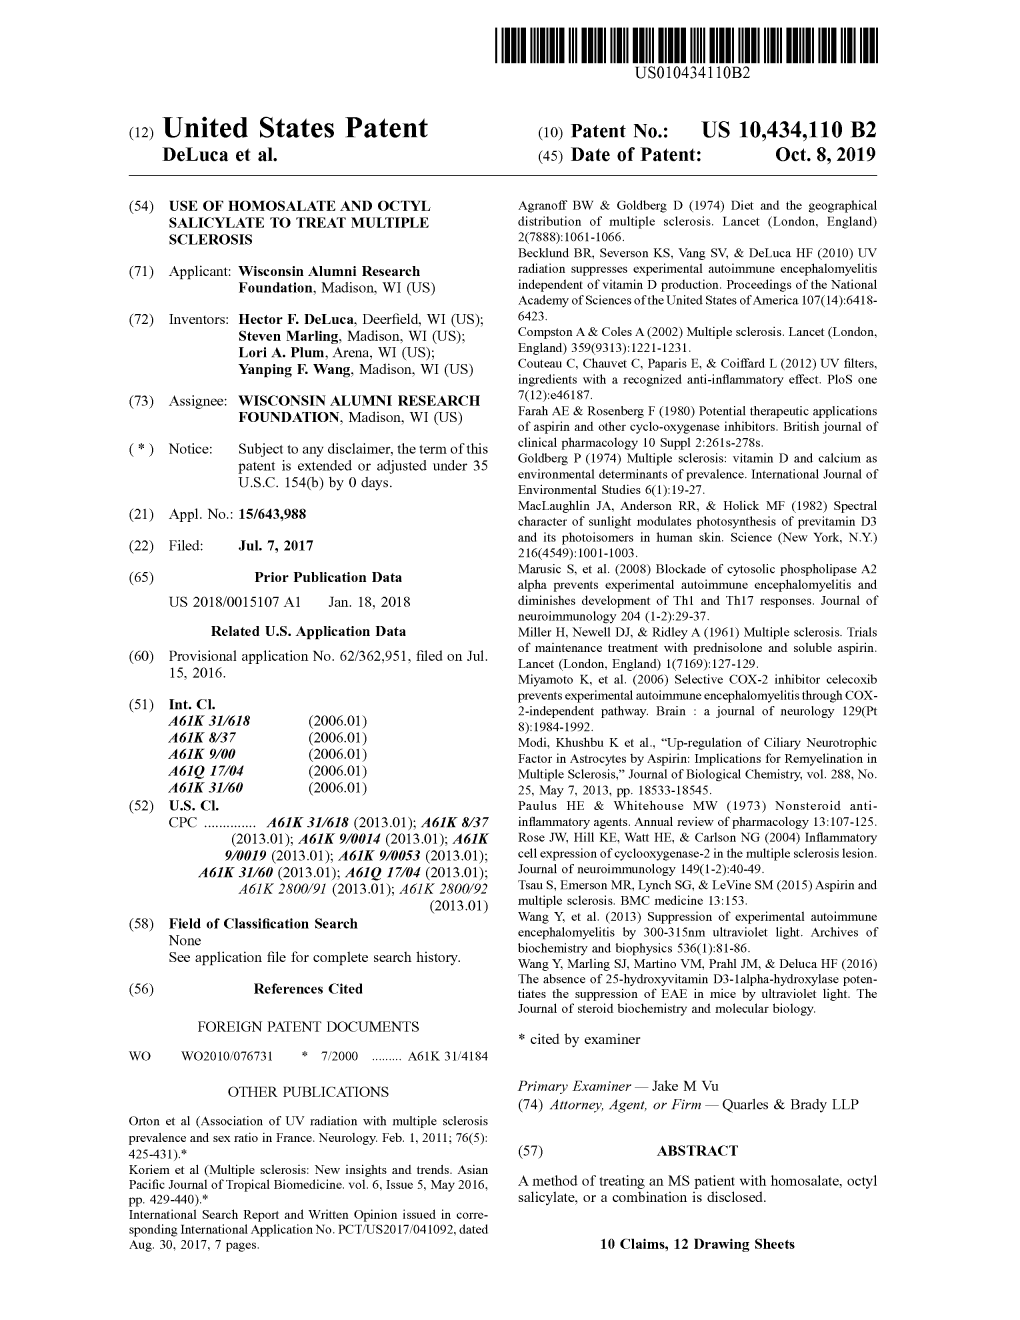 View U.S. Patent No. 10434110 in PDF Format